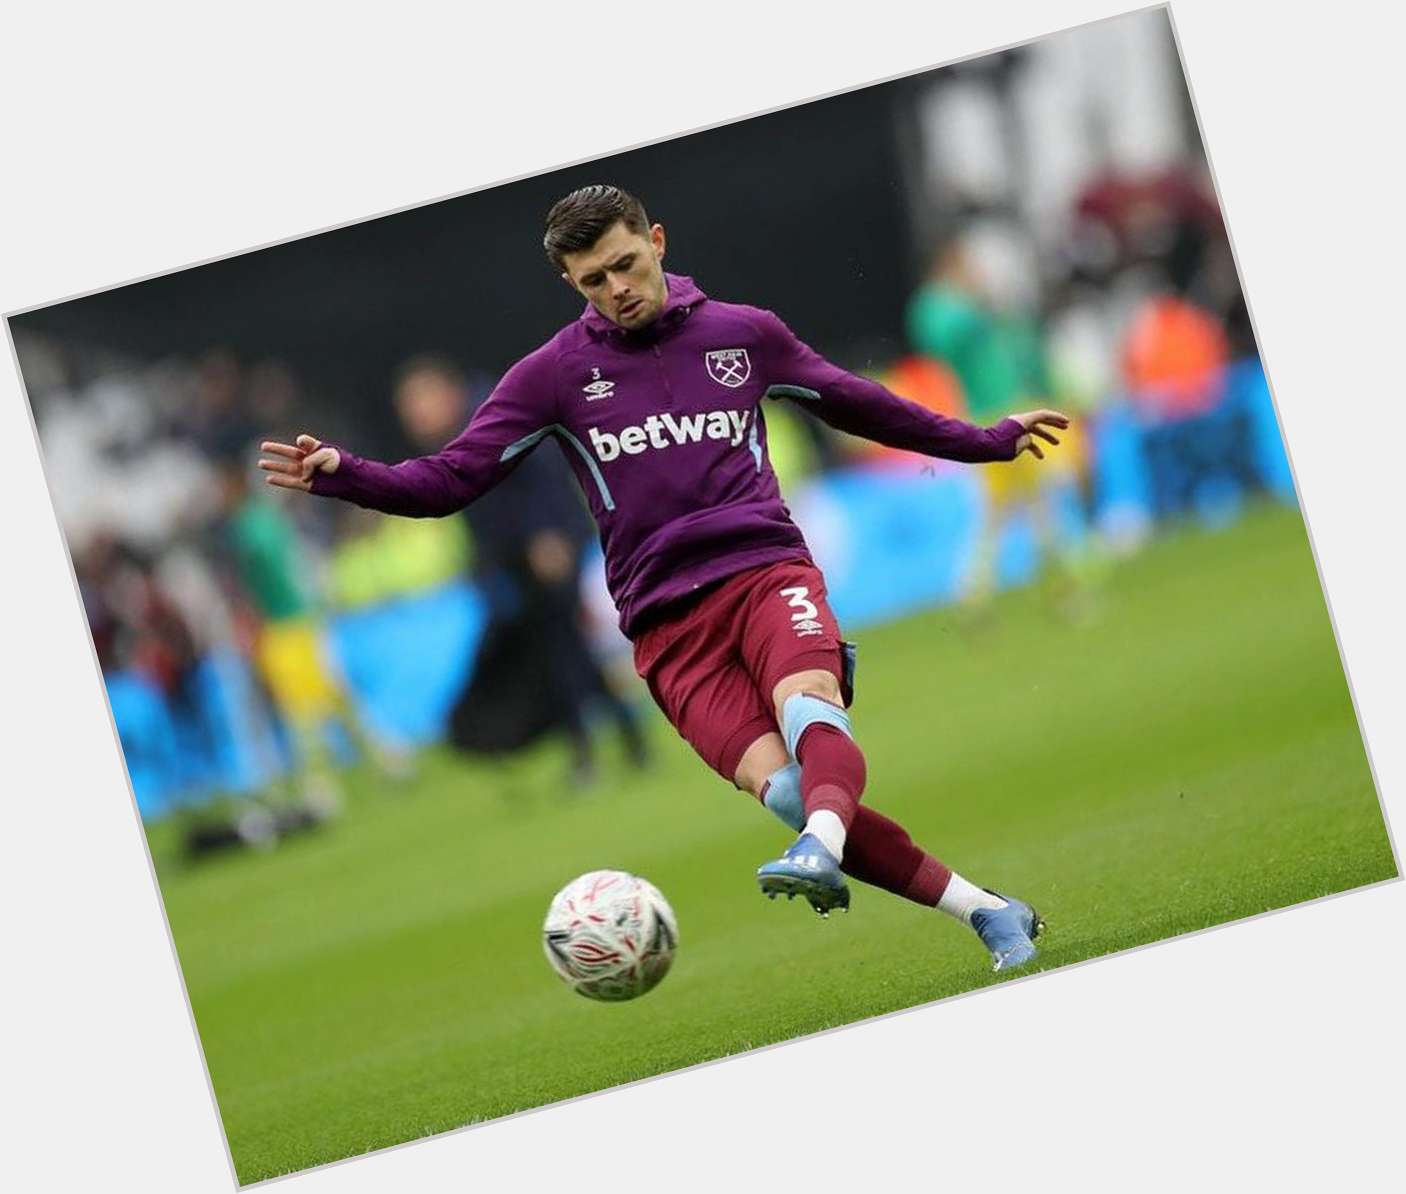 Https://fanpagepress.net/m/A/Aaron Cresswell New Pic 1